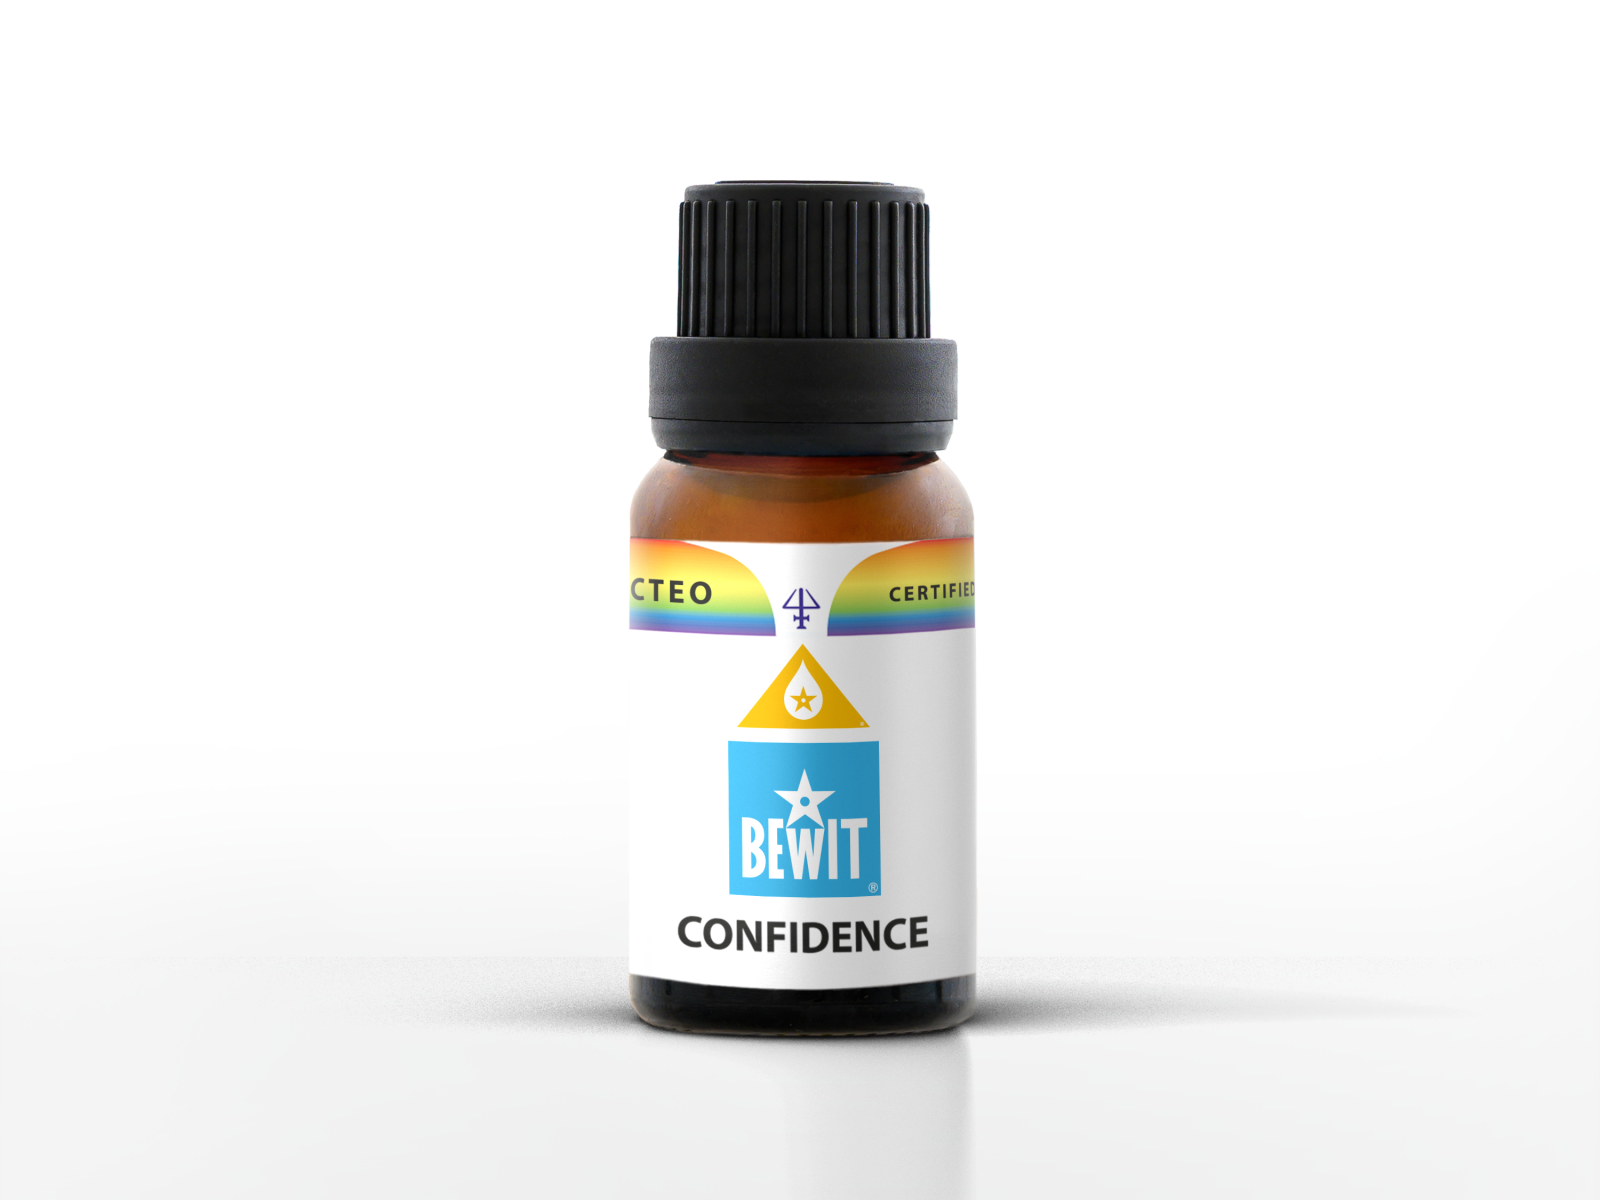 BEWIT CONFIDENCE - Blend of essential oils